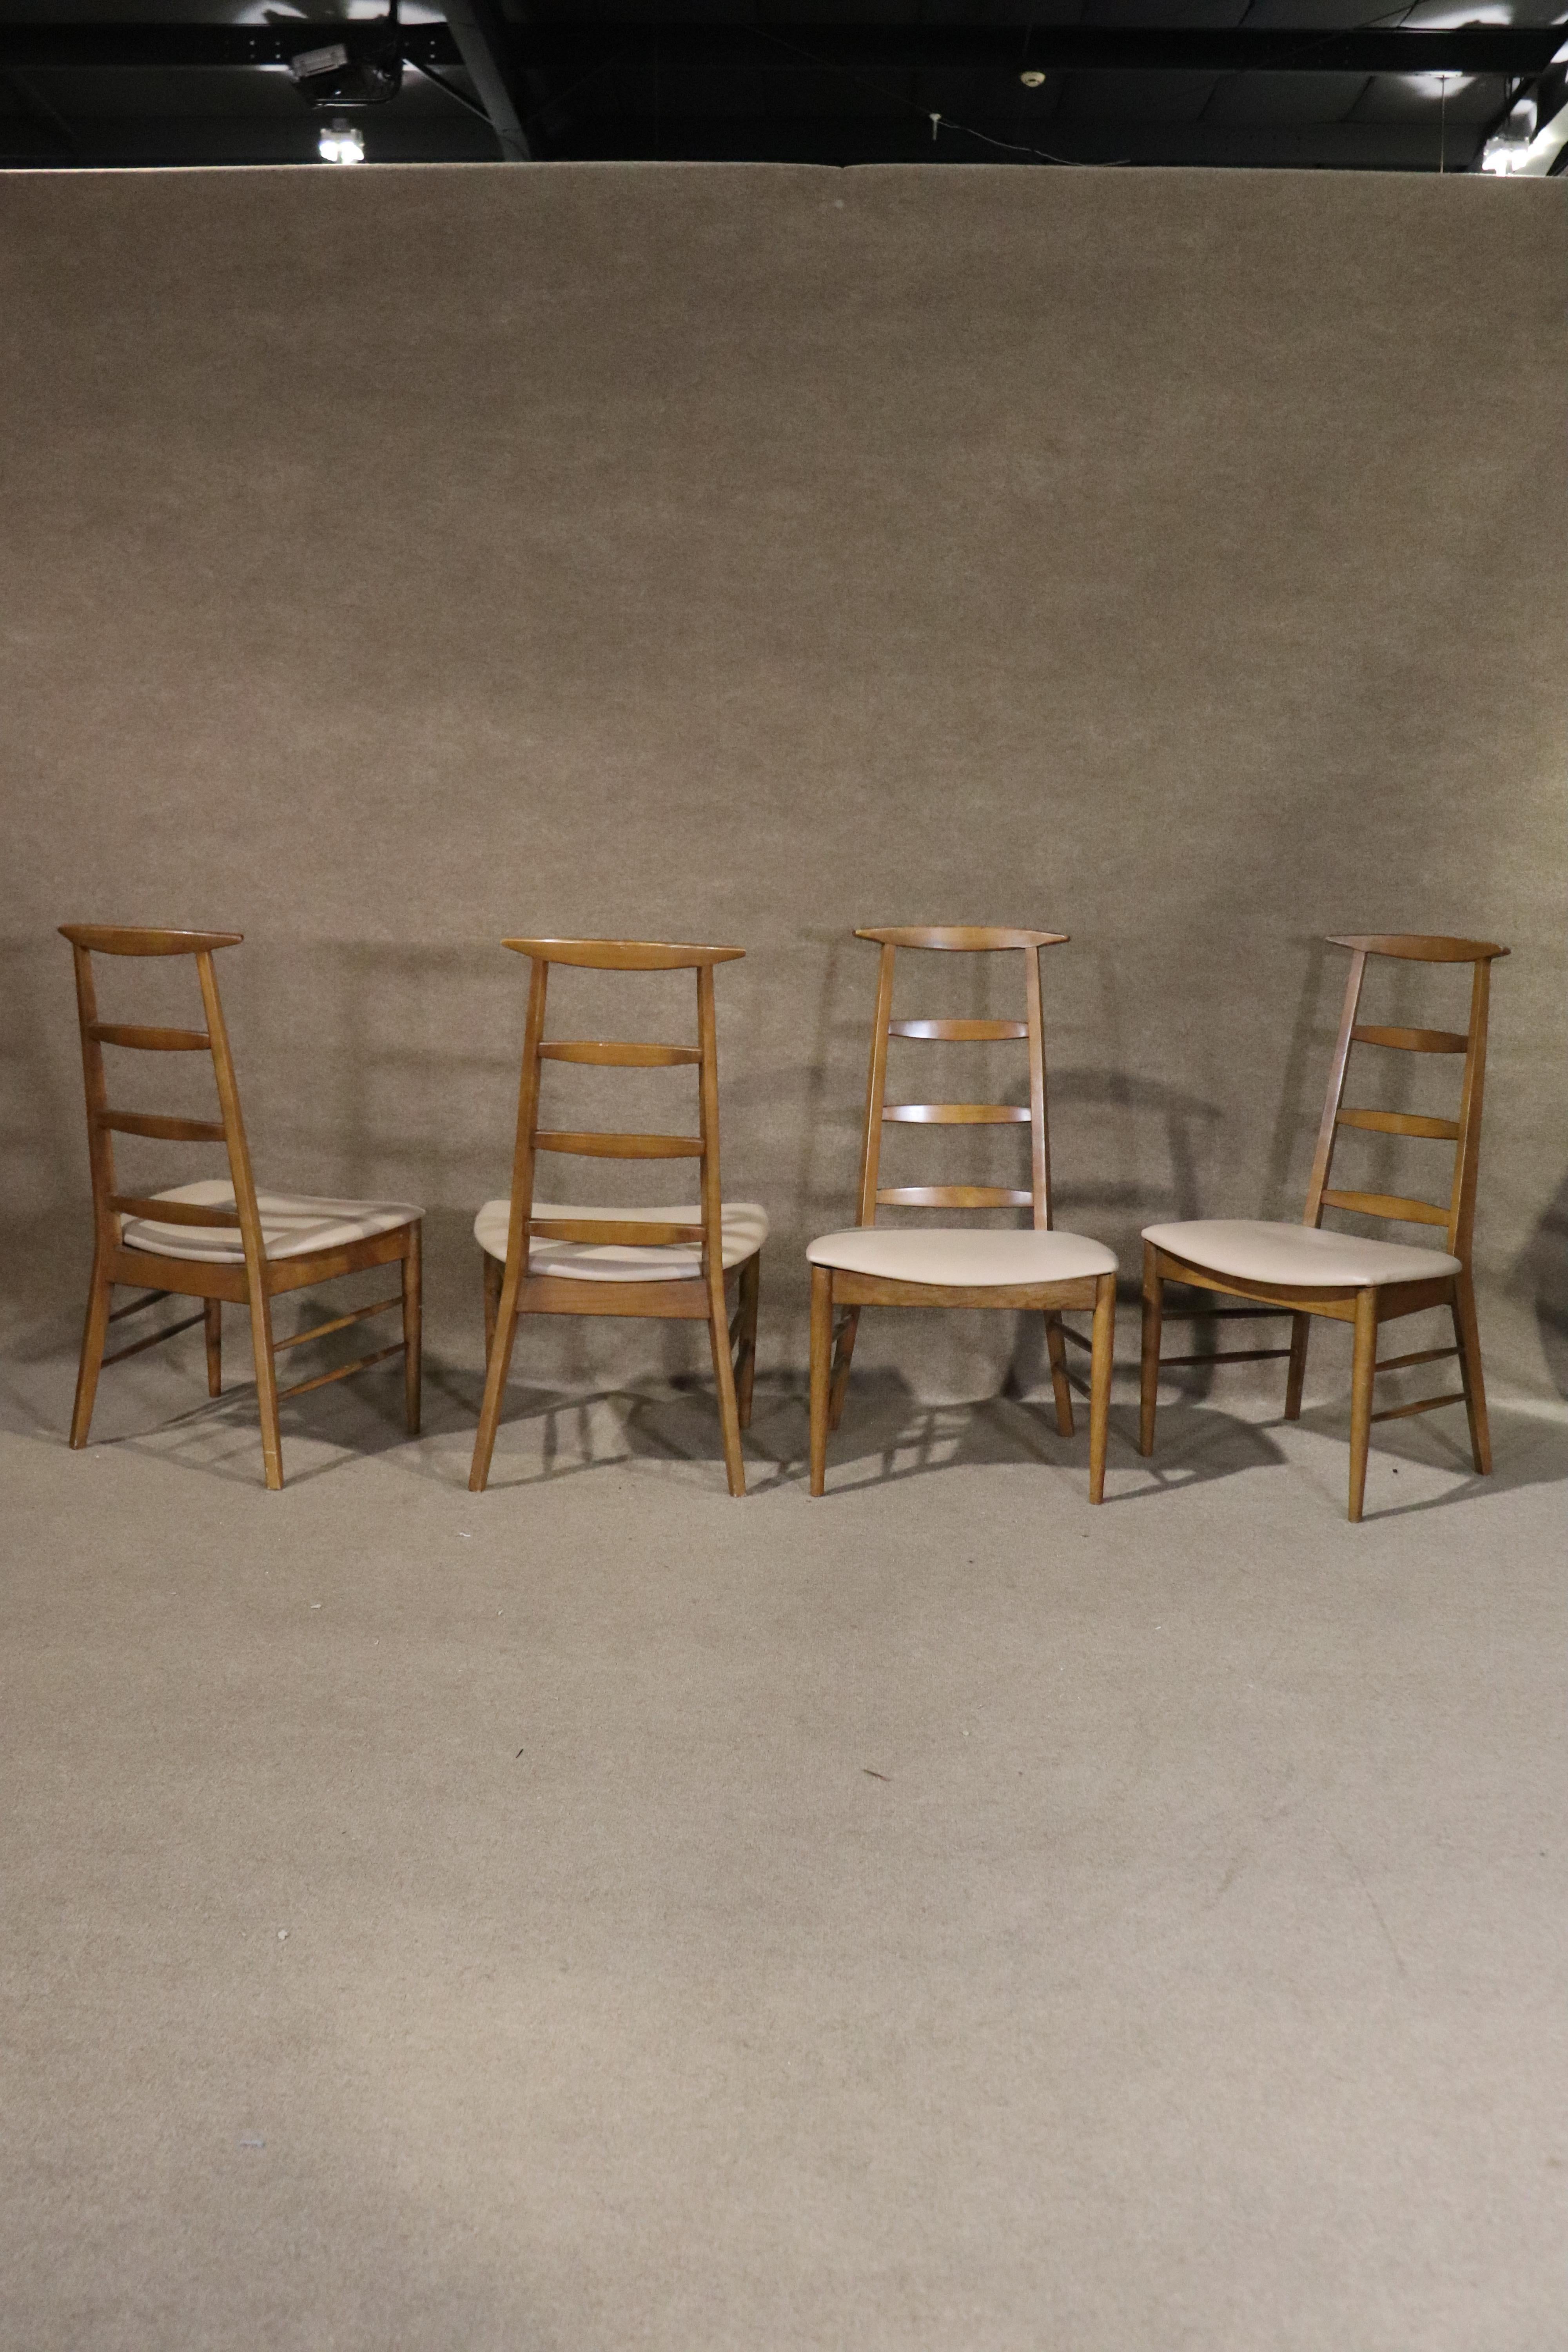 Set of four dining chairs by Farstrup Mobler in Denmark. Ladder backs with vinyl seats.
Please confirm location NY or NJ